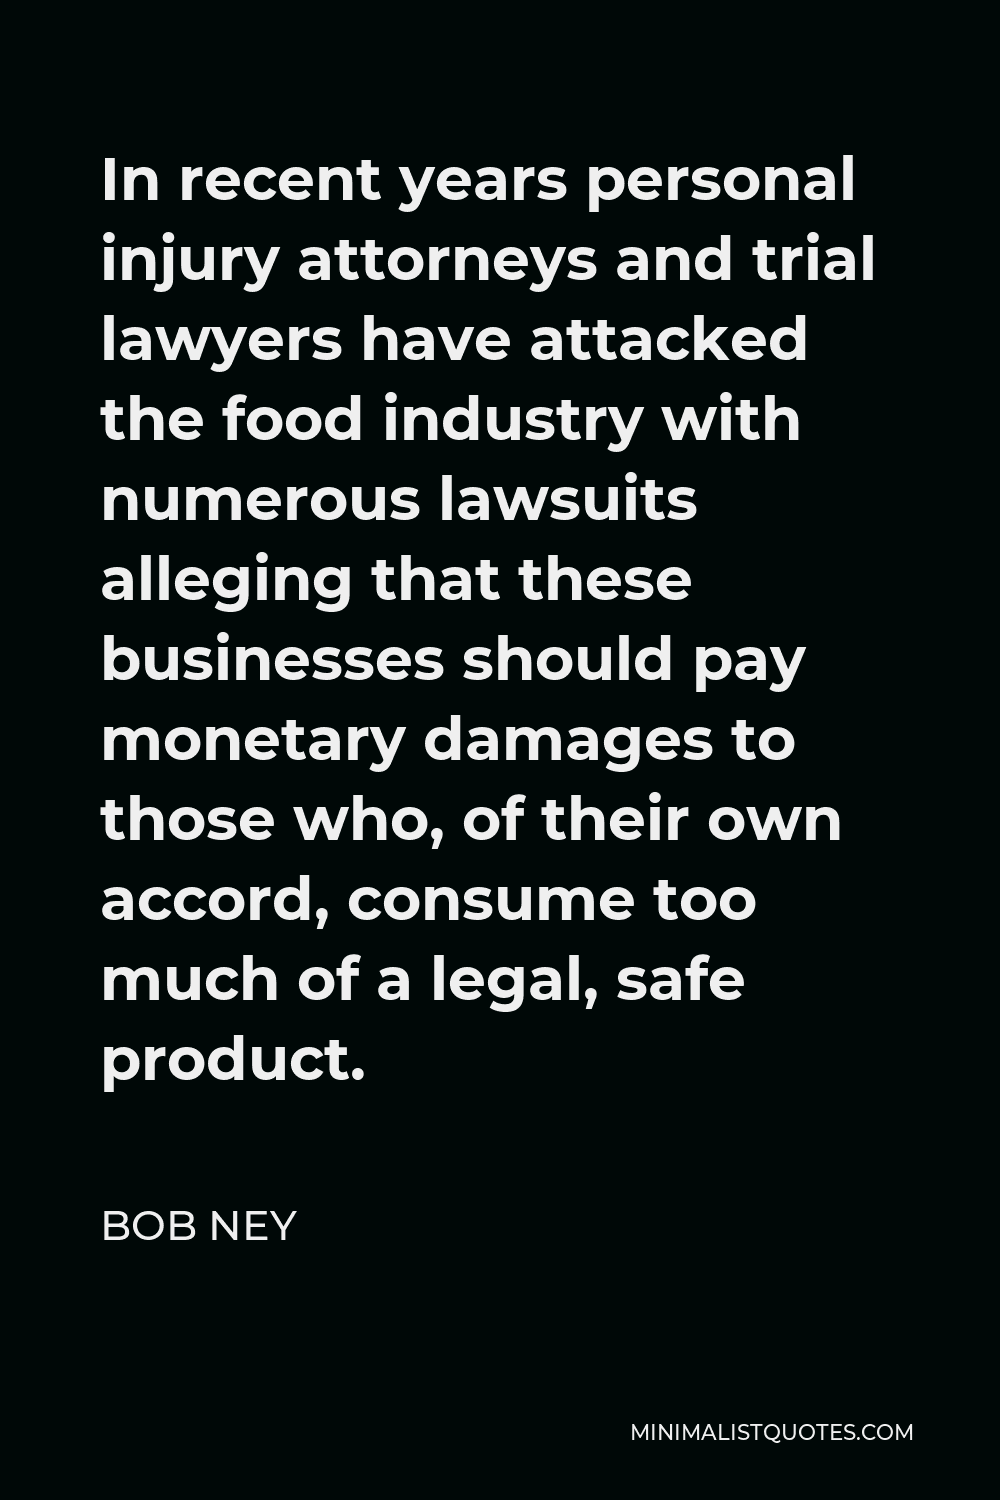 Bob Ney Quote - In recent years personal injury attorneys and trial lawyers have attacked the food industry with numerous lawsuits alleging that these businesses should pay monetary damages to those who, of their own accord, consume too much of a legal, safe product.